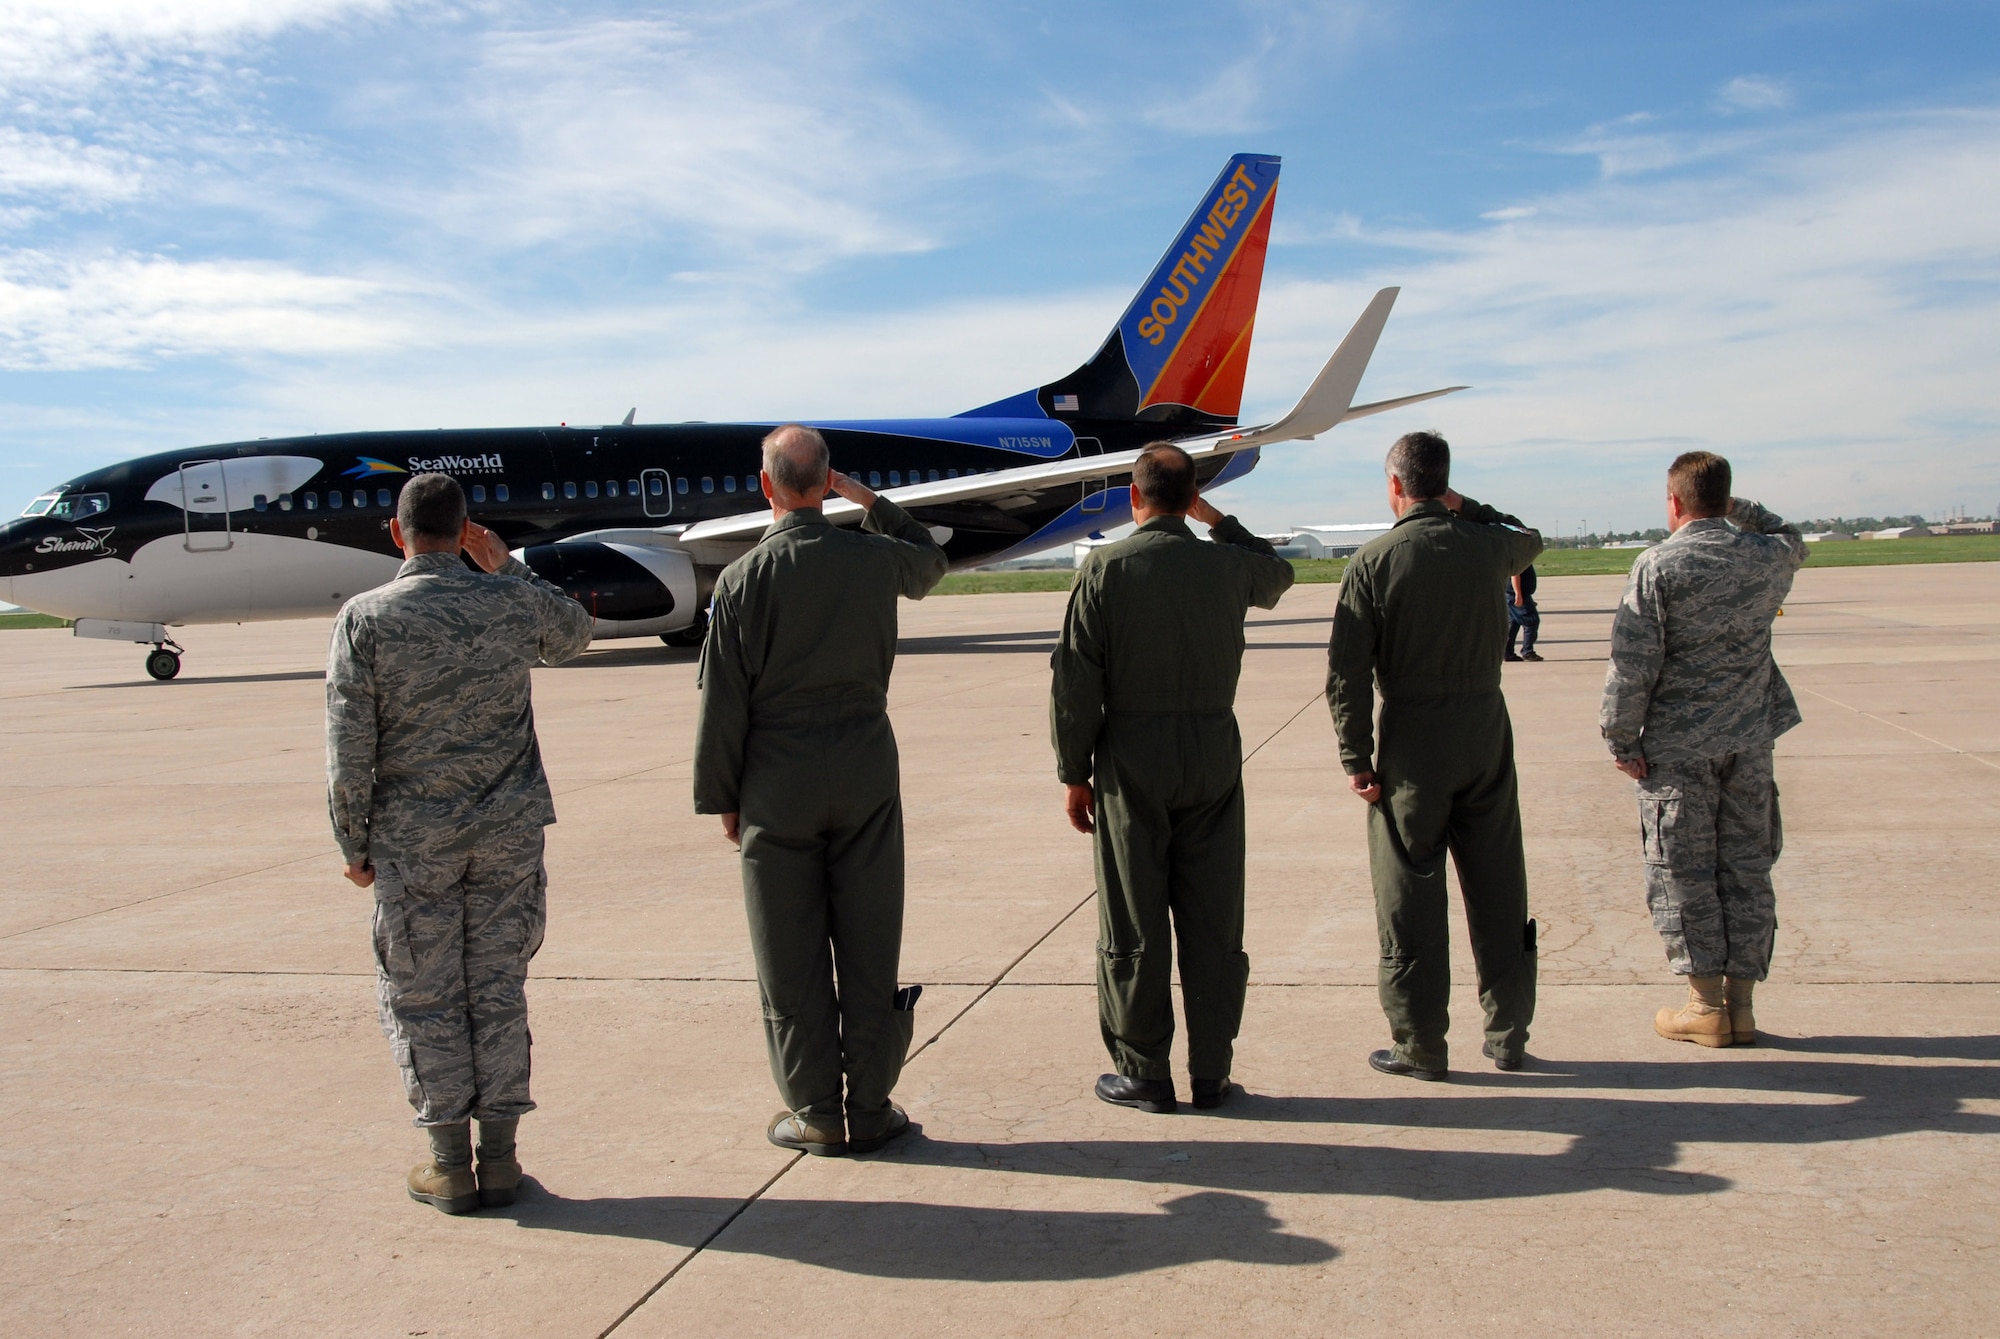 Air National Guard - Farewell ABUs. Hello OCPs! #ICYMI, Today is